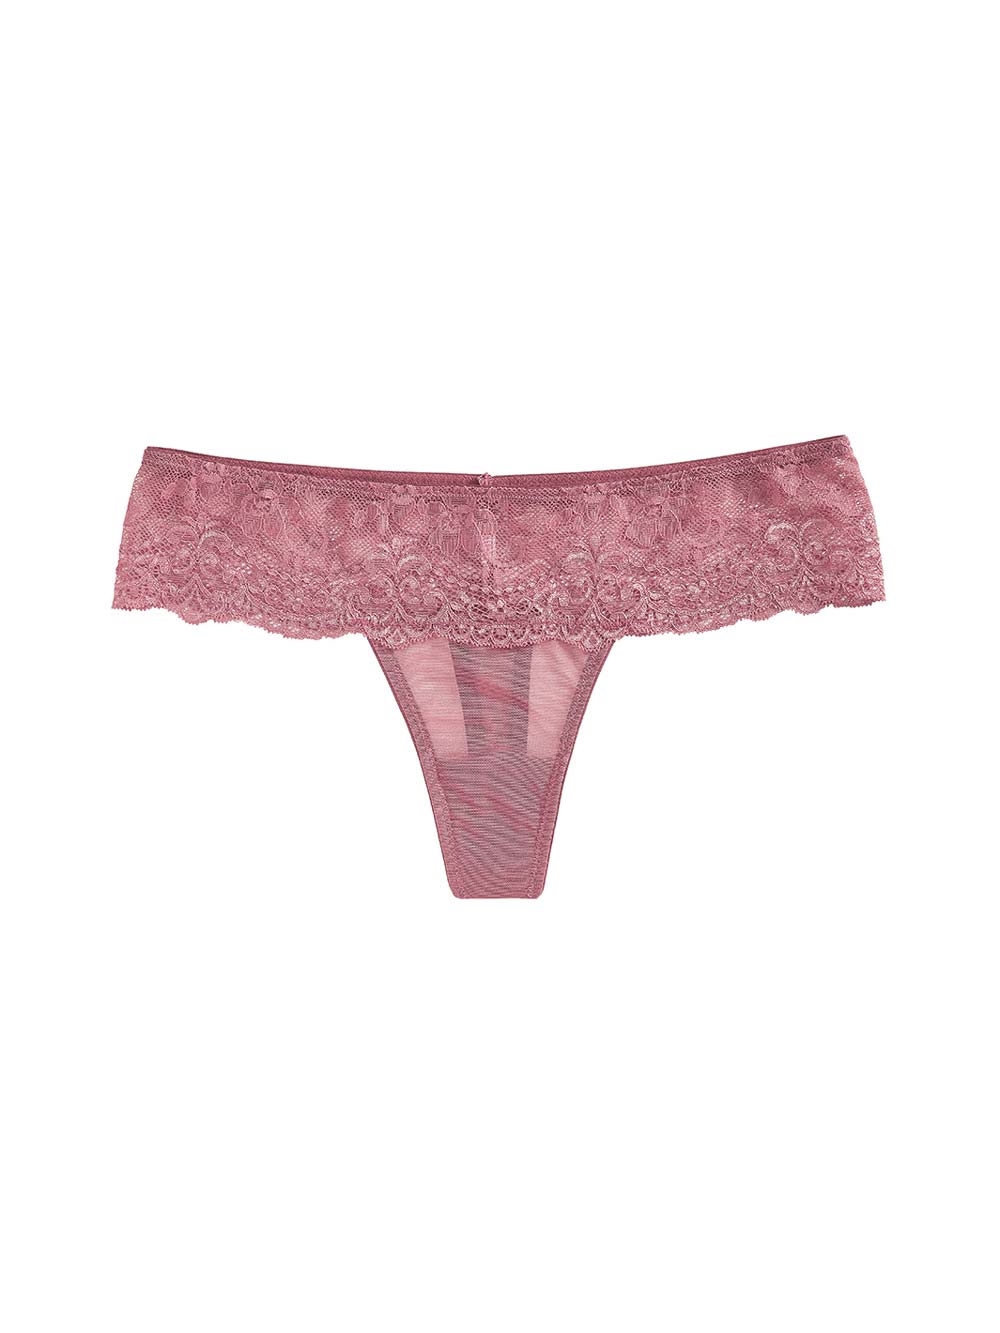 Petite Lingerie, Lucia Smooth Thong